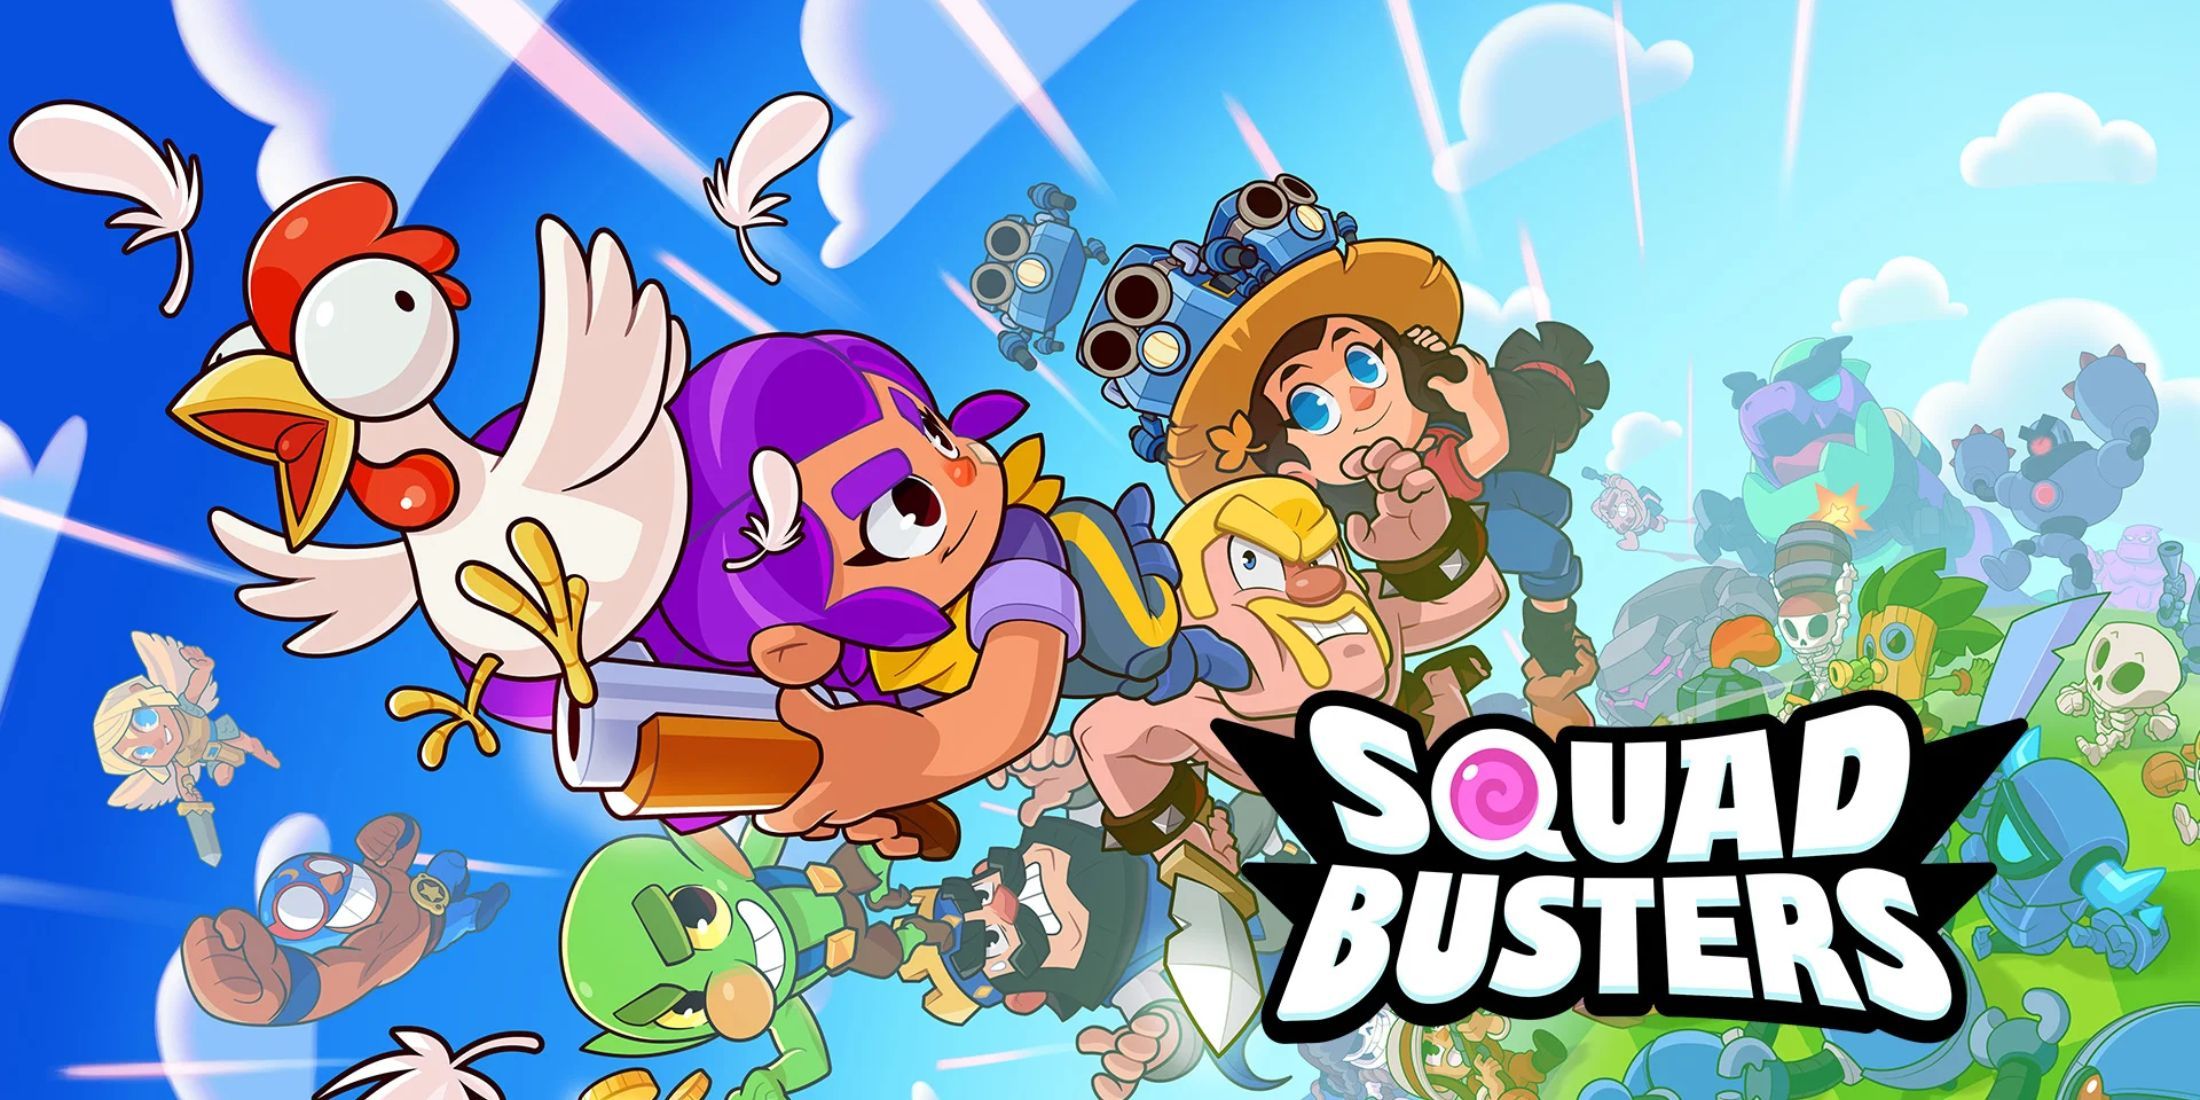 Squad Busters characters